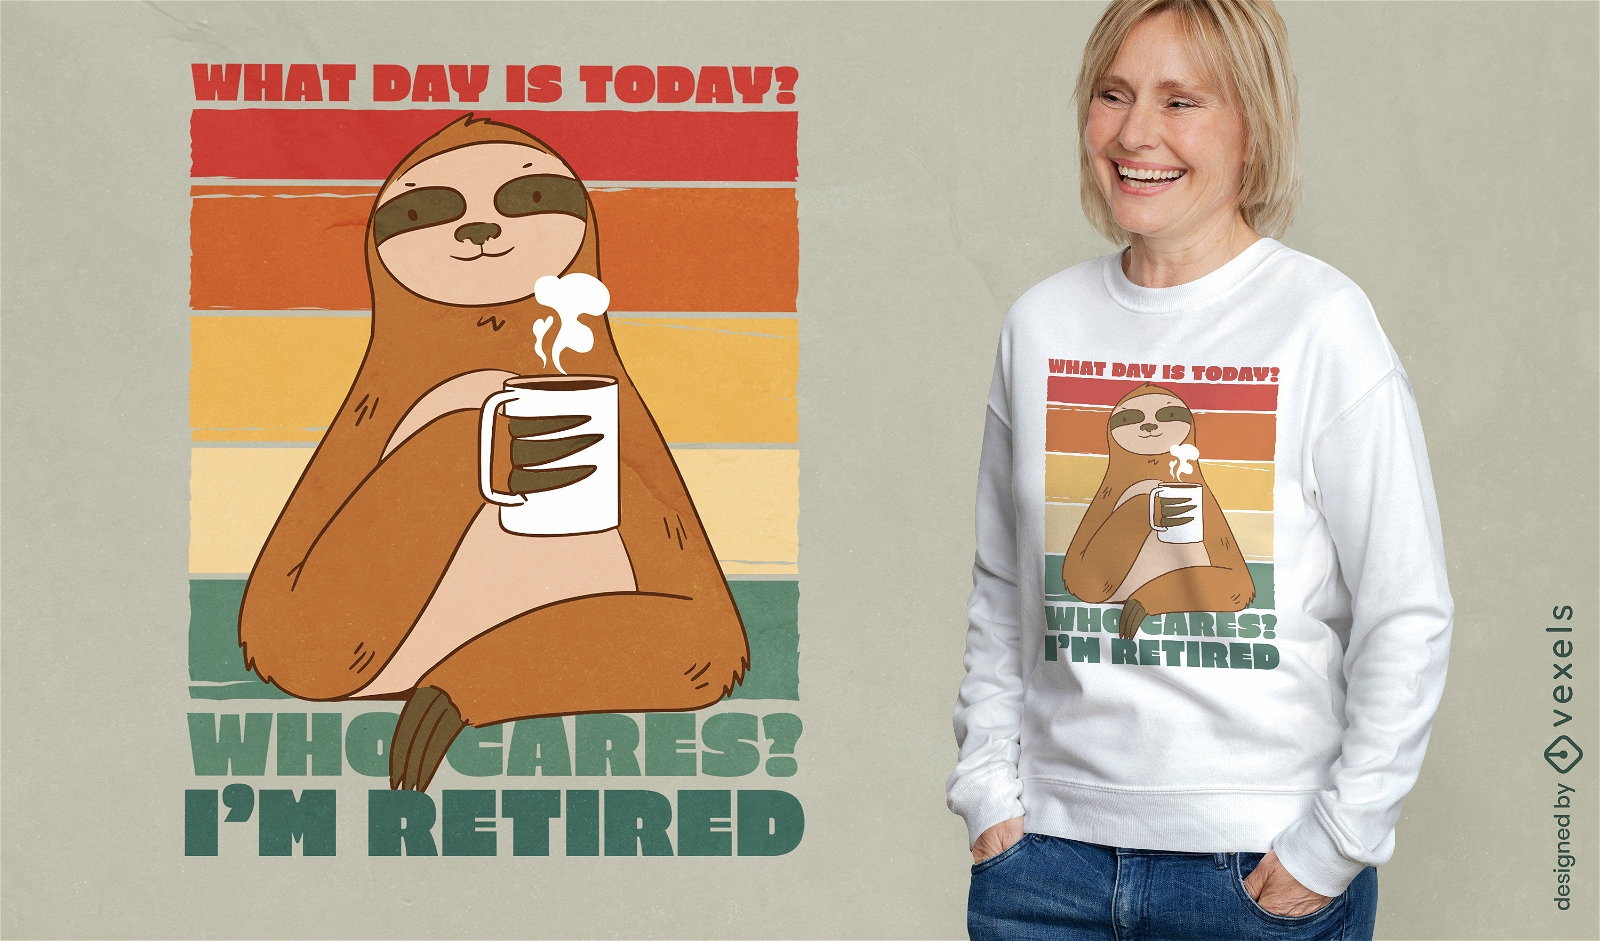 Retired quote sloth t-shirt design